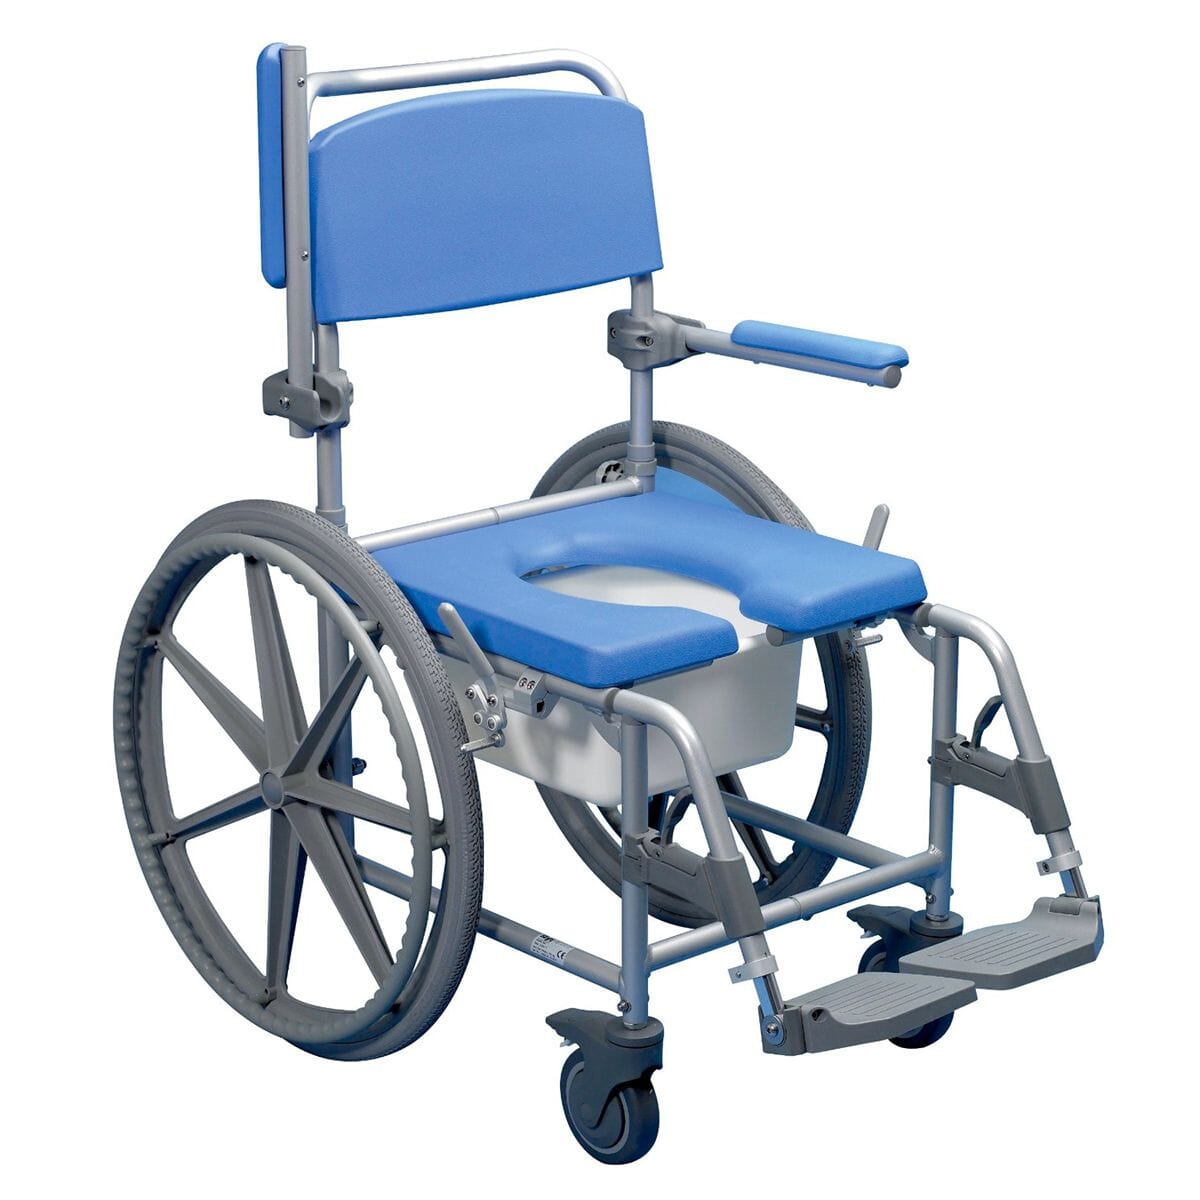 View Deluxe Shower Commode Chairs SelfPropelled information